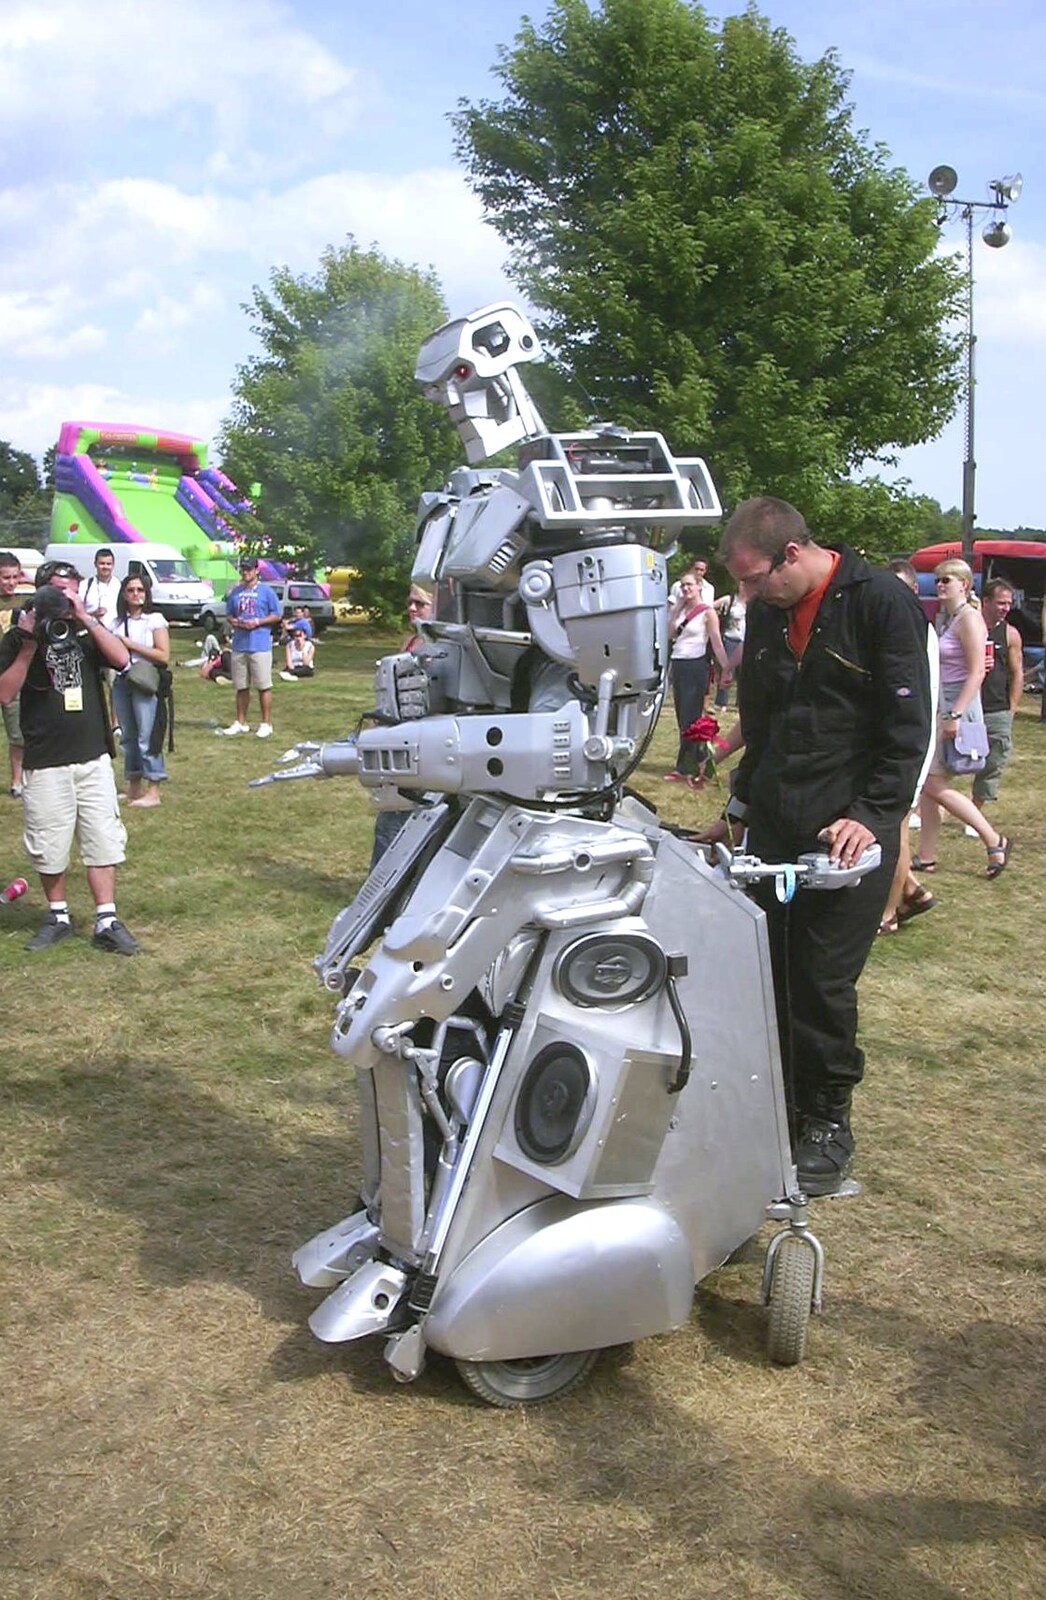 There's some kind of temrinator/beer robot from V Festival 2003, Hyland's Park, Chelmsford, Essex - 16th August 2003